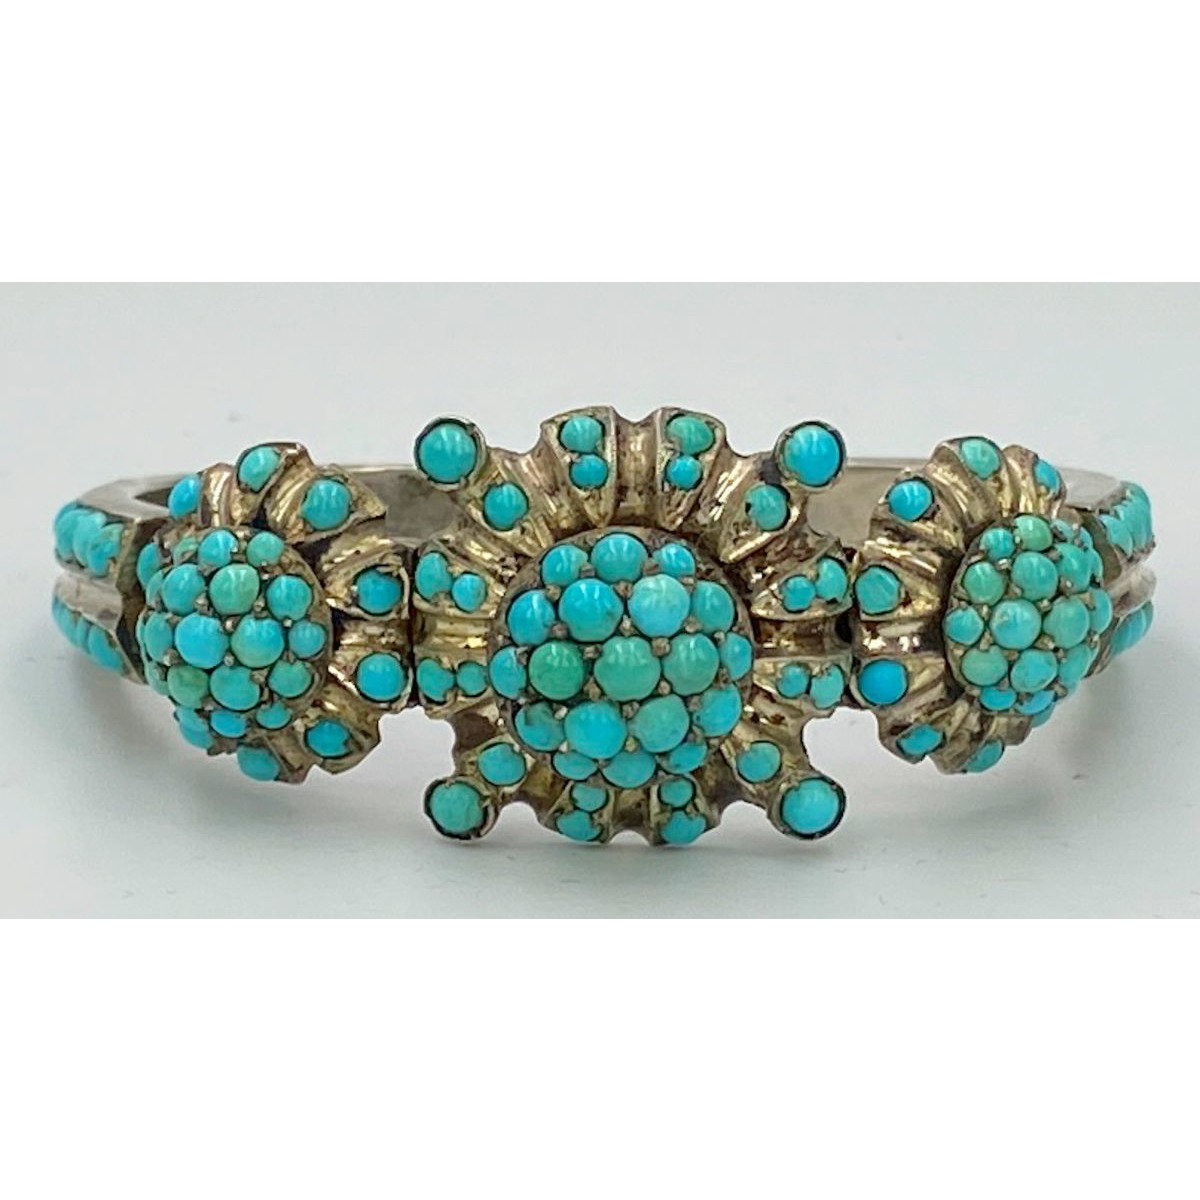 Tremendous Persian Turquoise Gilded Antique English Hinged Cuff Bangle